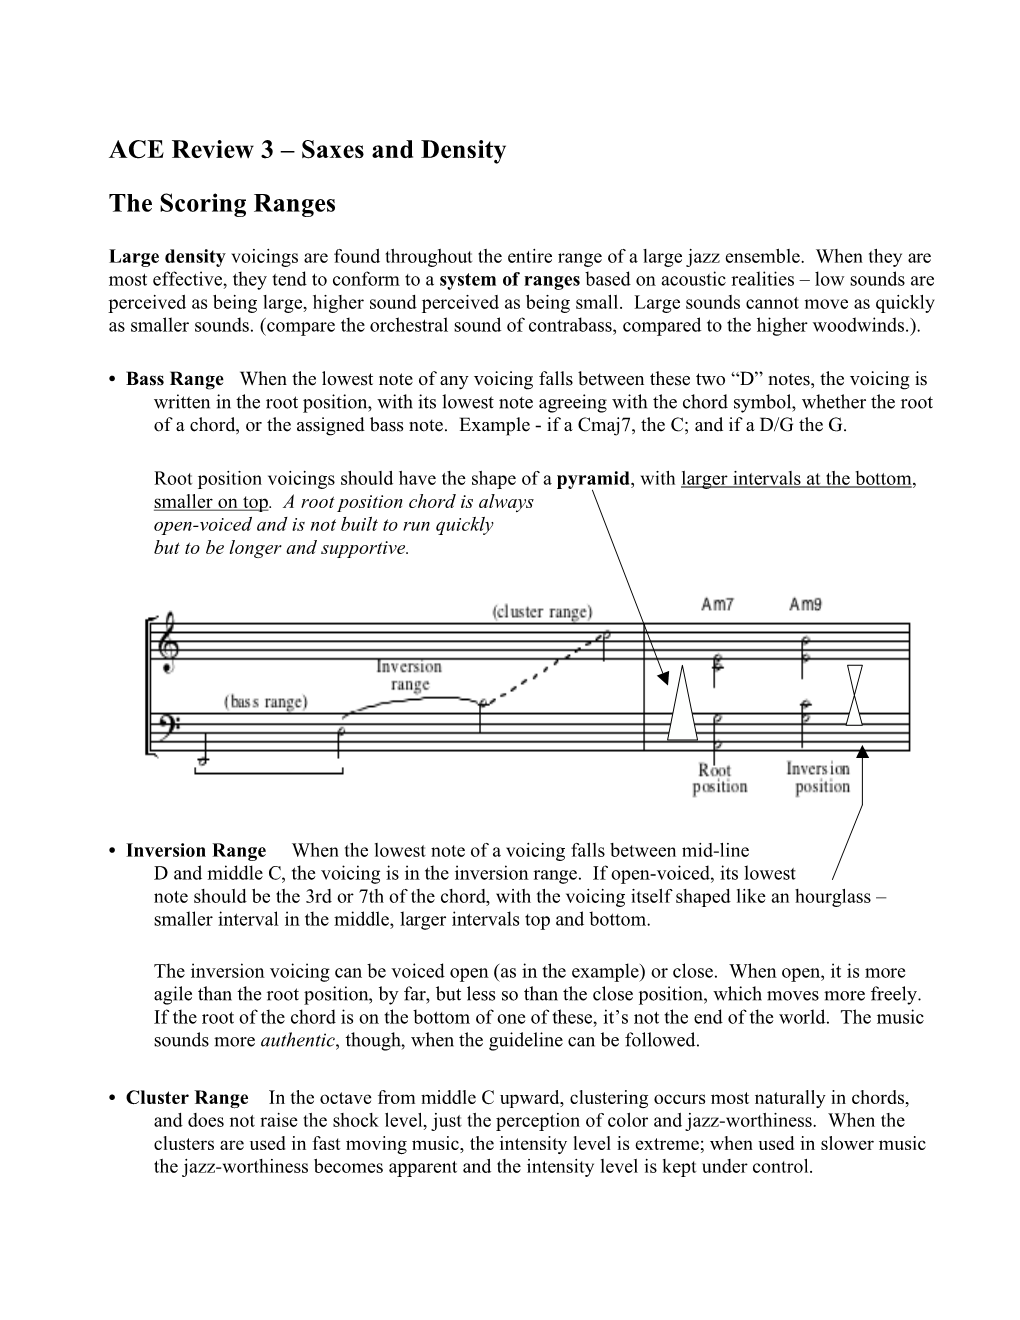 ACE Review 3 – Saxes and Density the Scoring Ranges